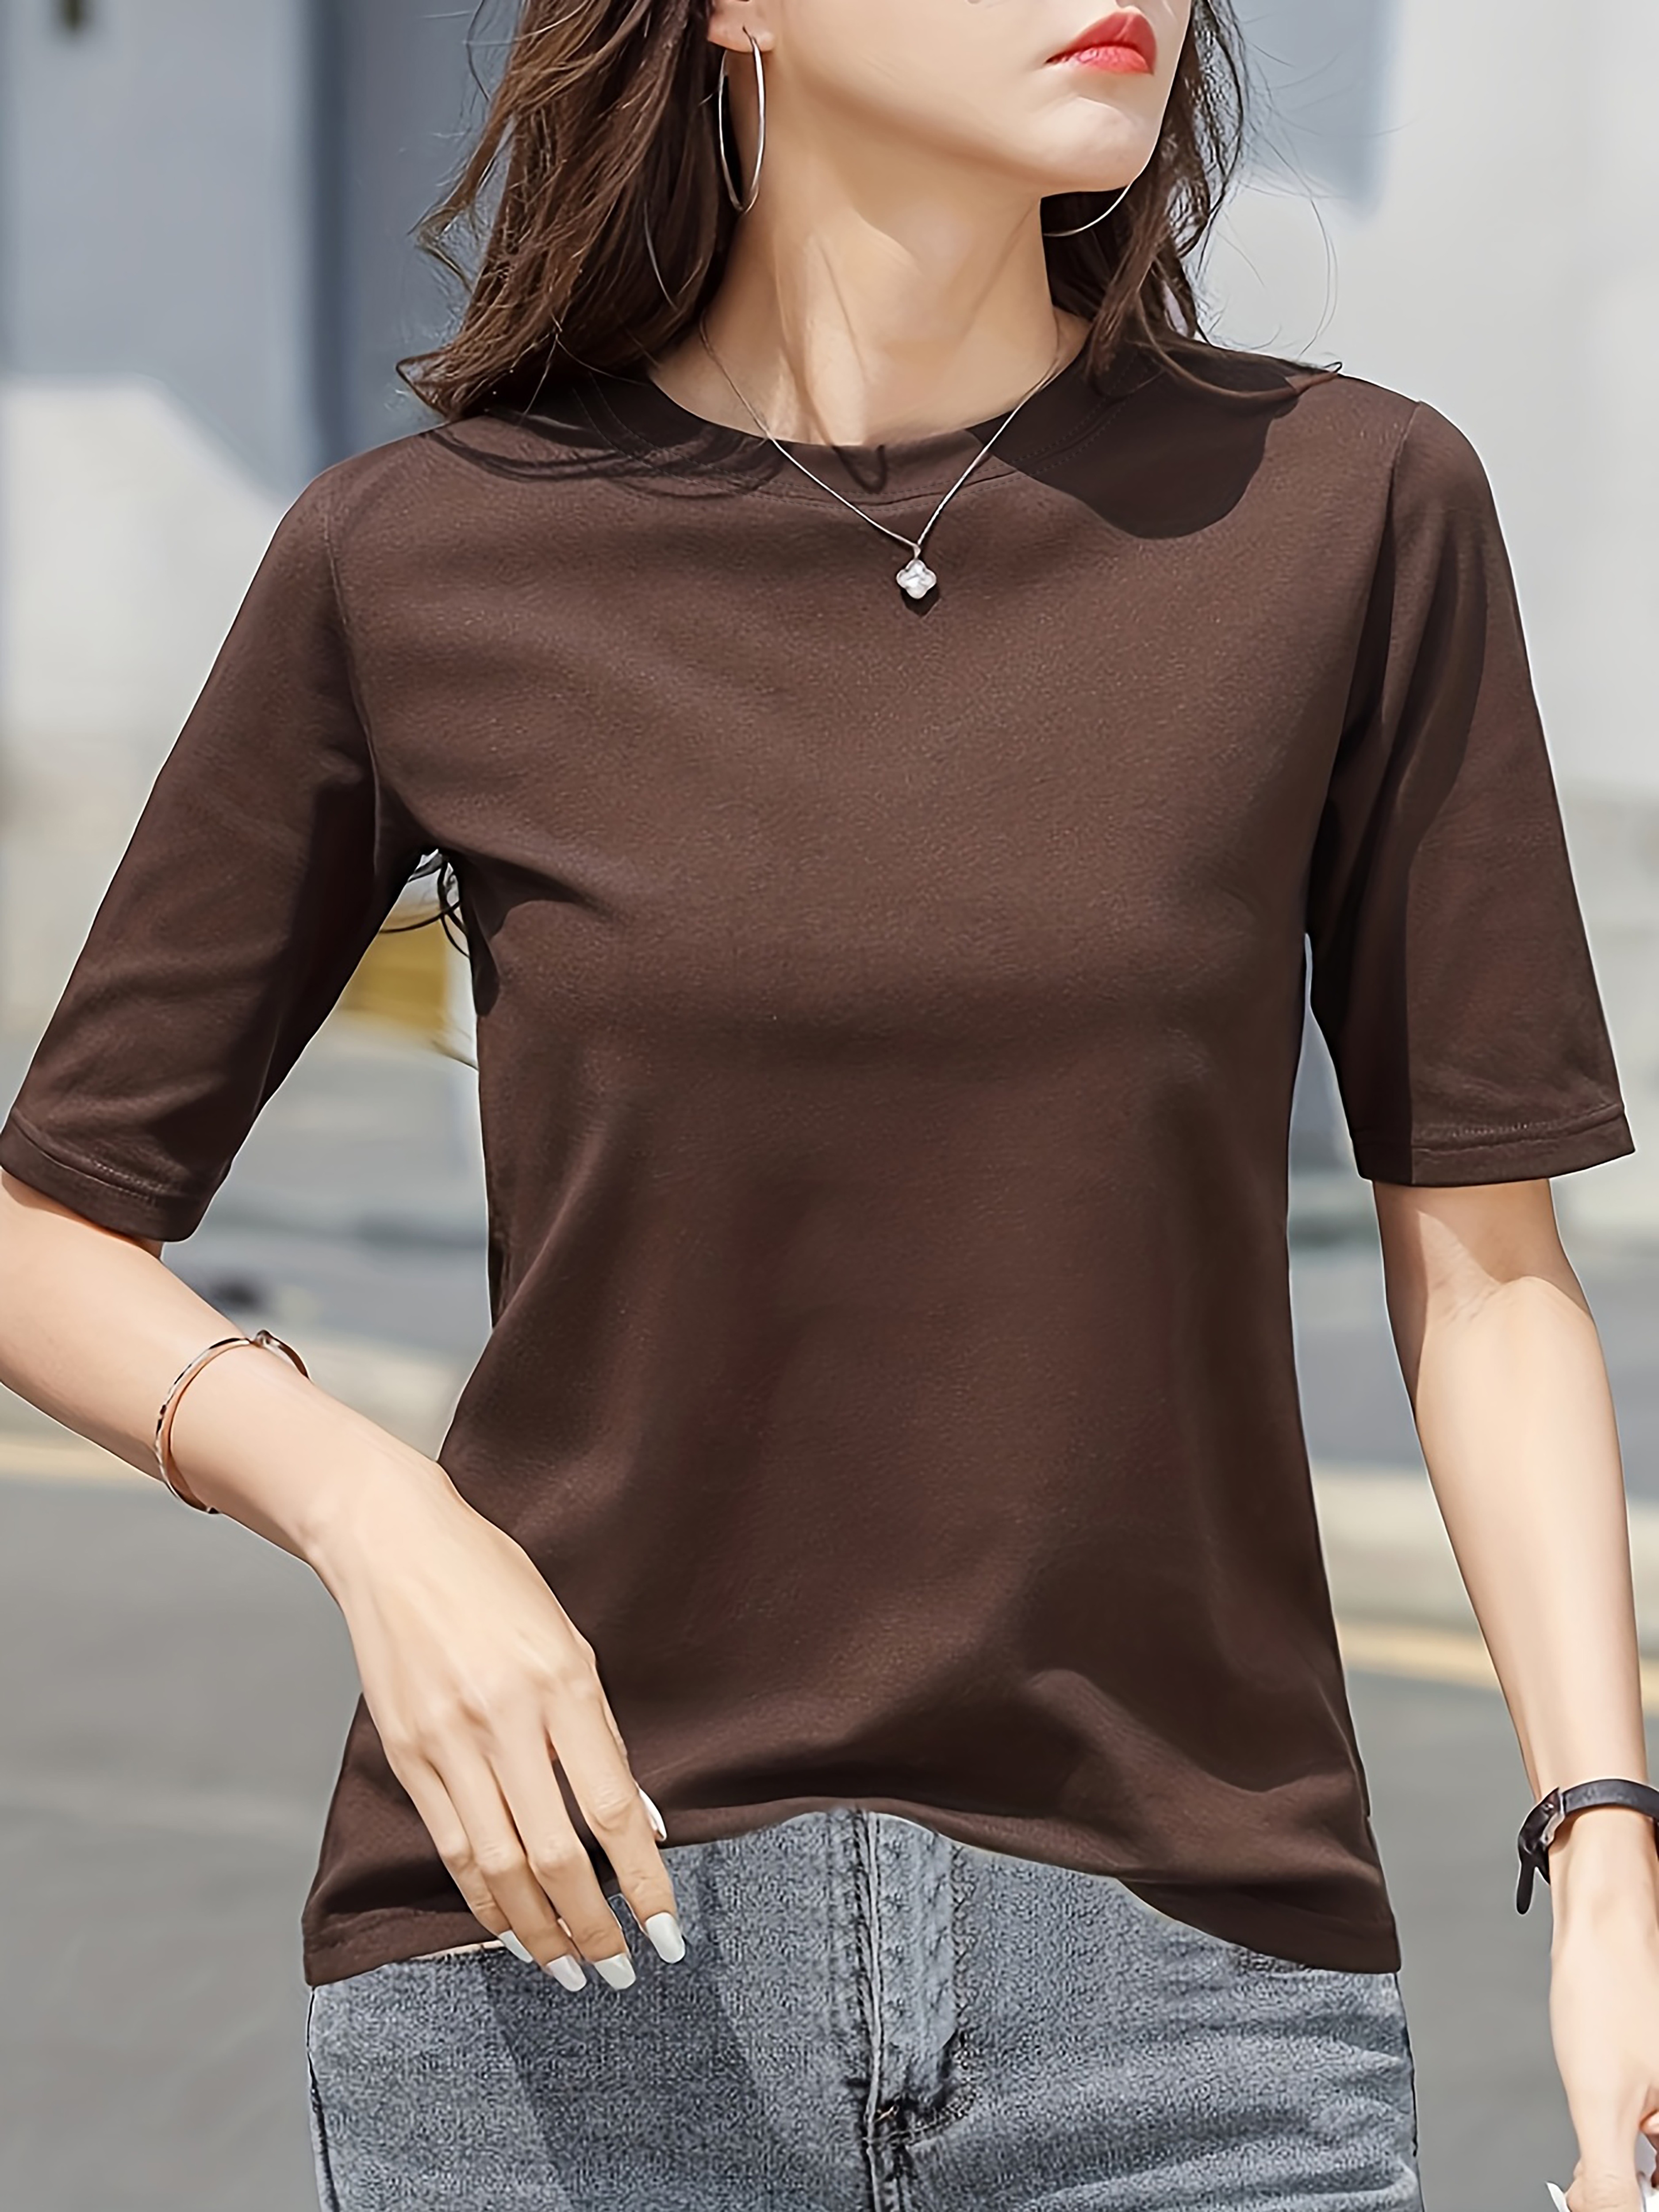 Pure Cotton Short Sleeve T-shirt for Women, Loose Top Clothes